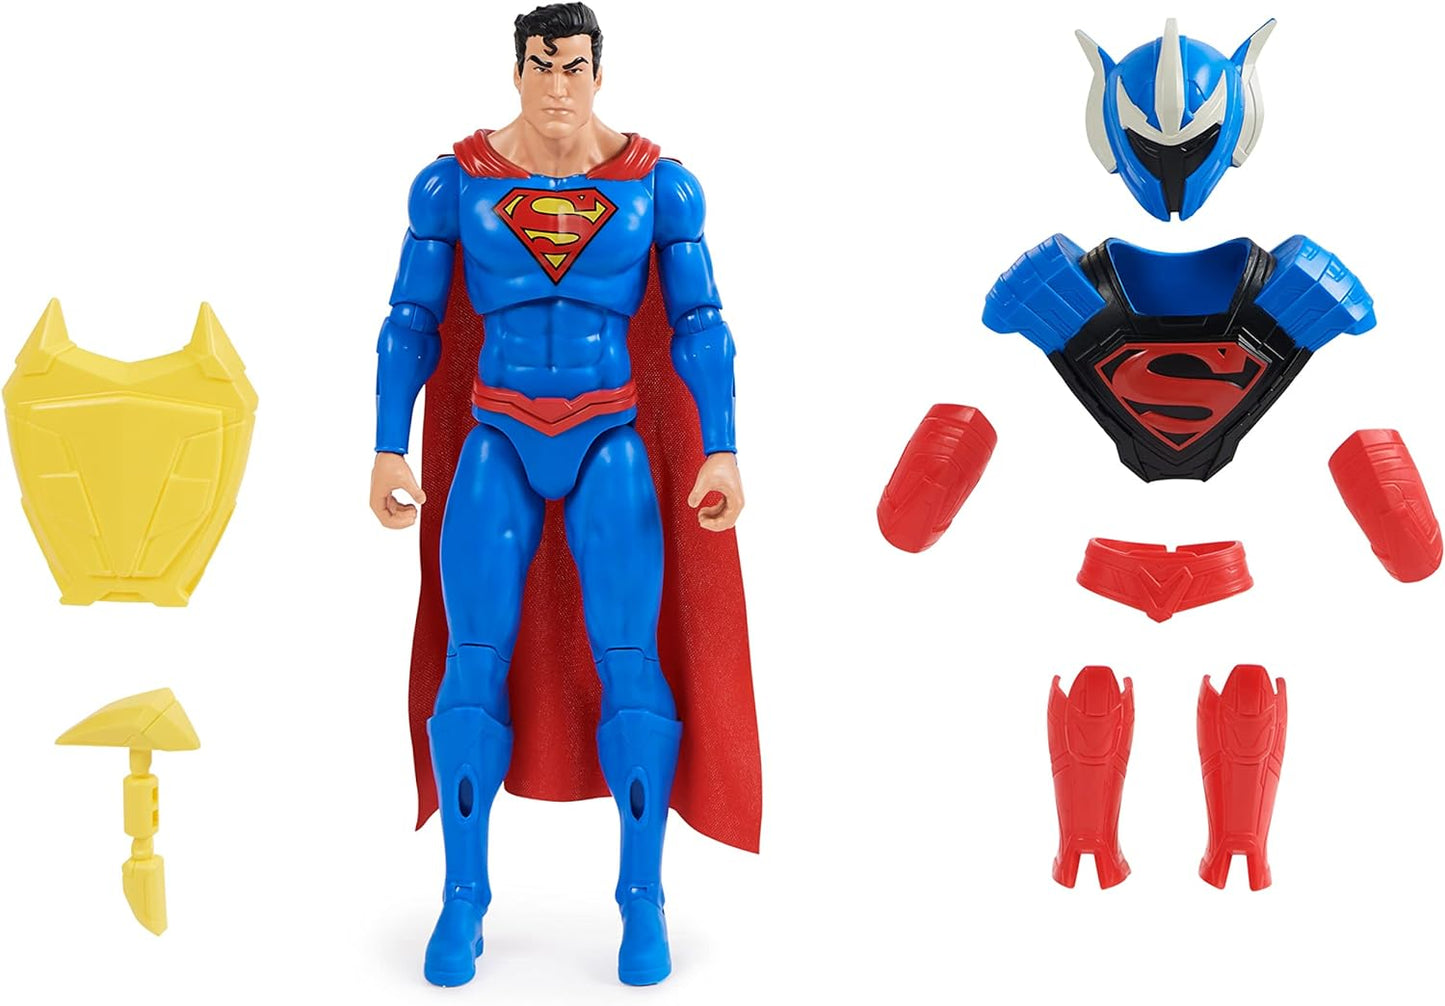 Spin Master DC Comics, Superman Man of Steel Action Figure, DC Adventures, 12 Inch, 9 Accessories, Collectible Superhero Kids Toys for Boys and Girls, Ages 4+